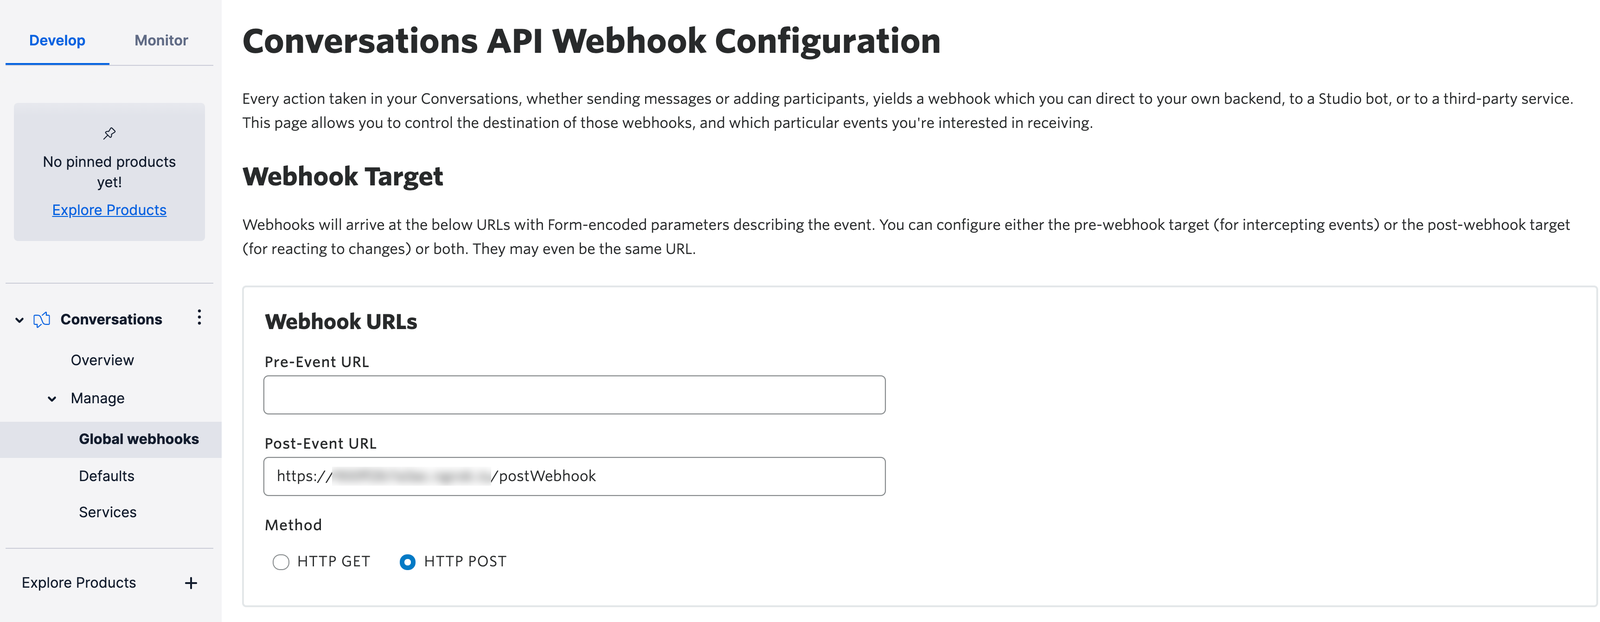 Configuring global webhooks for Conversations in the Twilio Console.